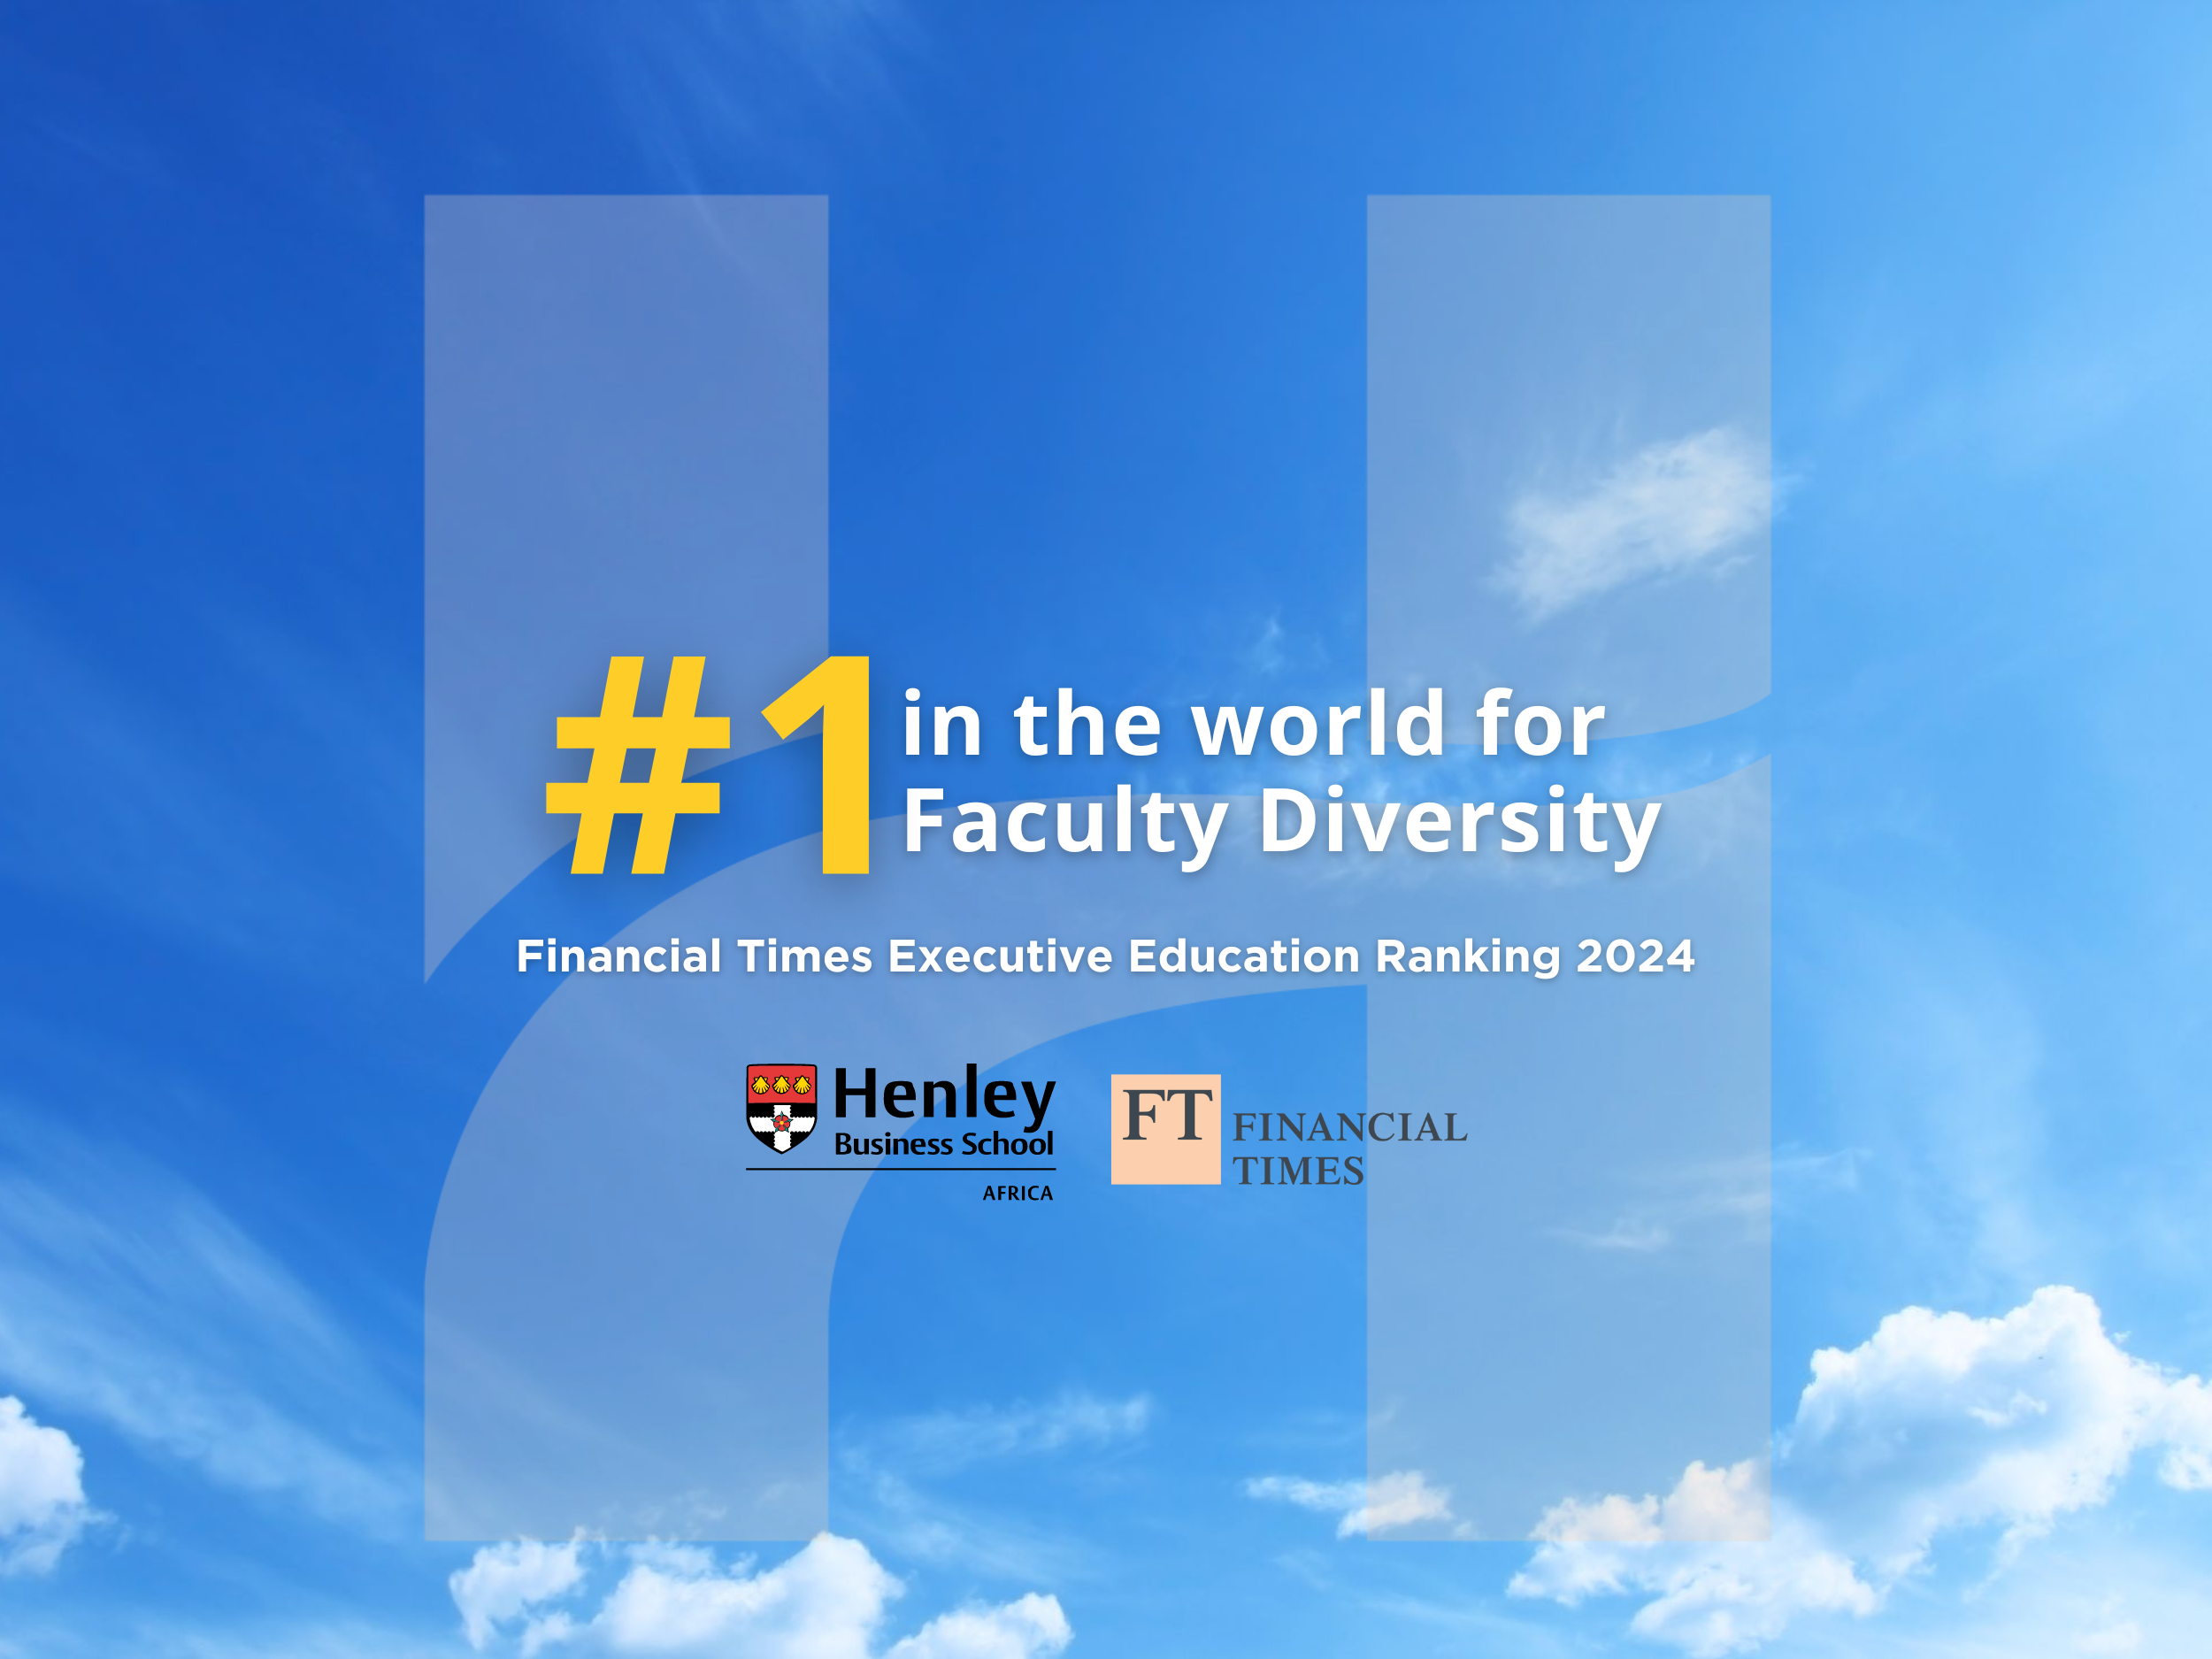 Henley Business School again recognised as top in the world for faculty diversity